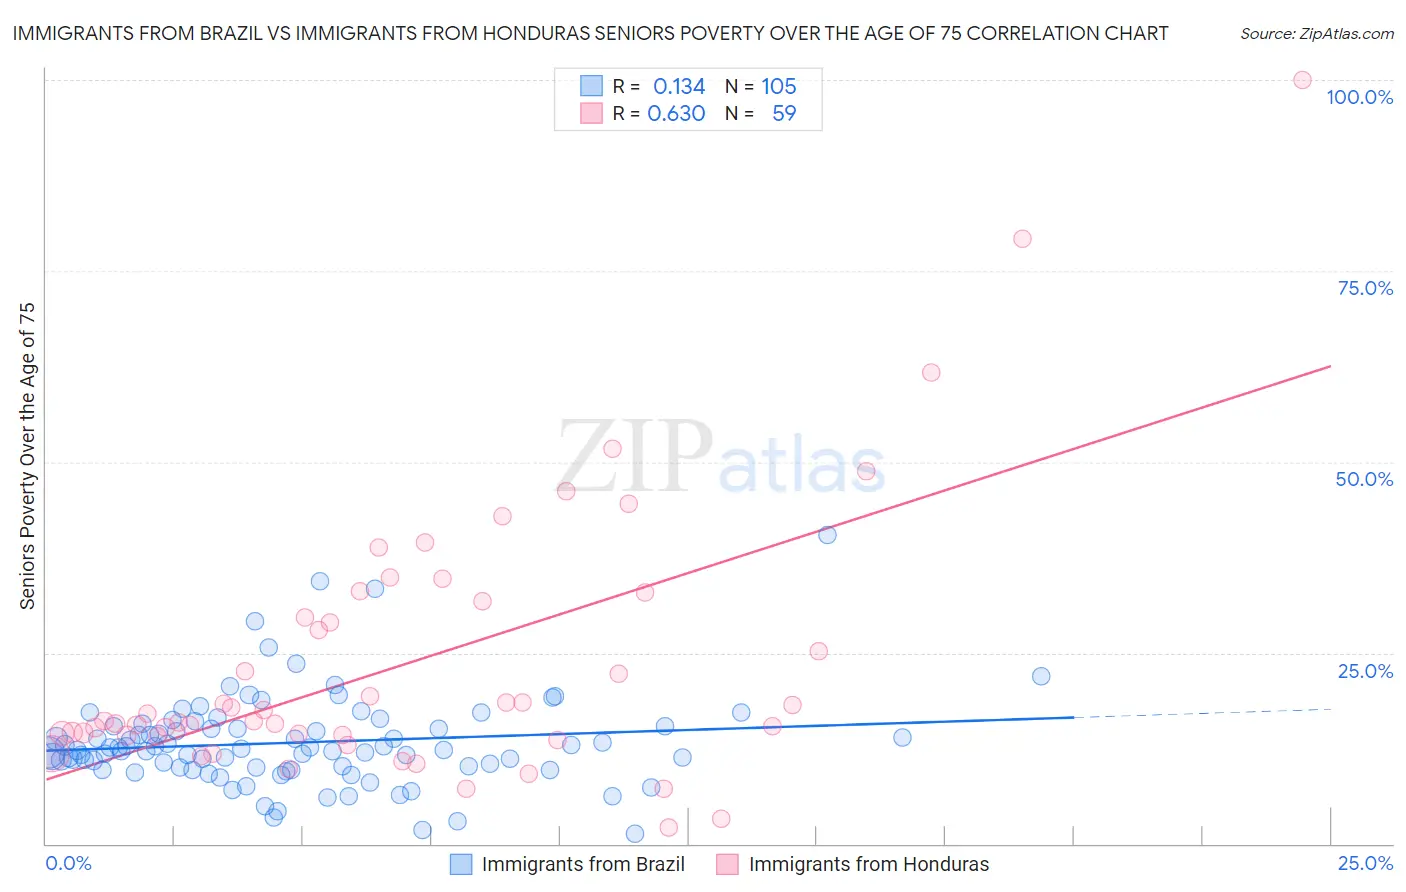 Immigrants from Brazil vs Immigrants from Honduras Seniors Poverty Over the Age of 75